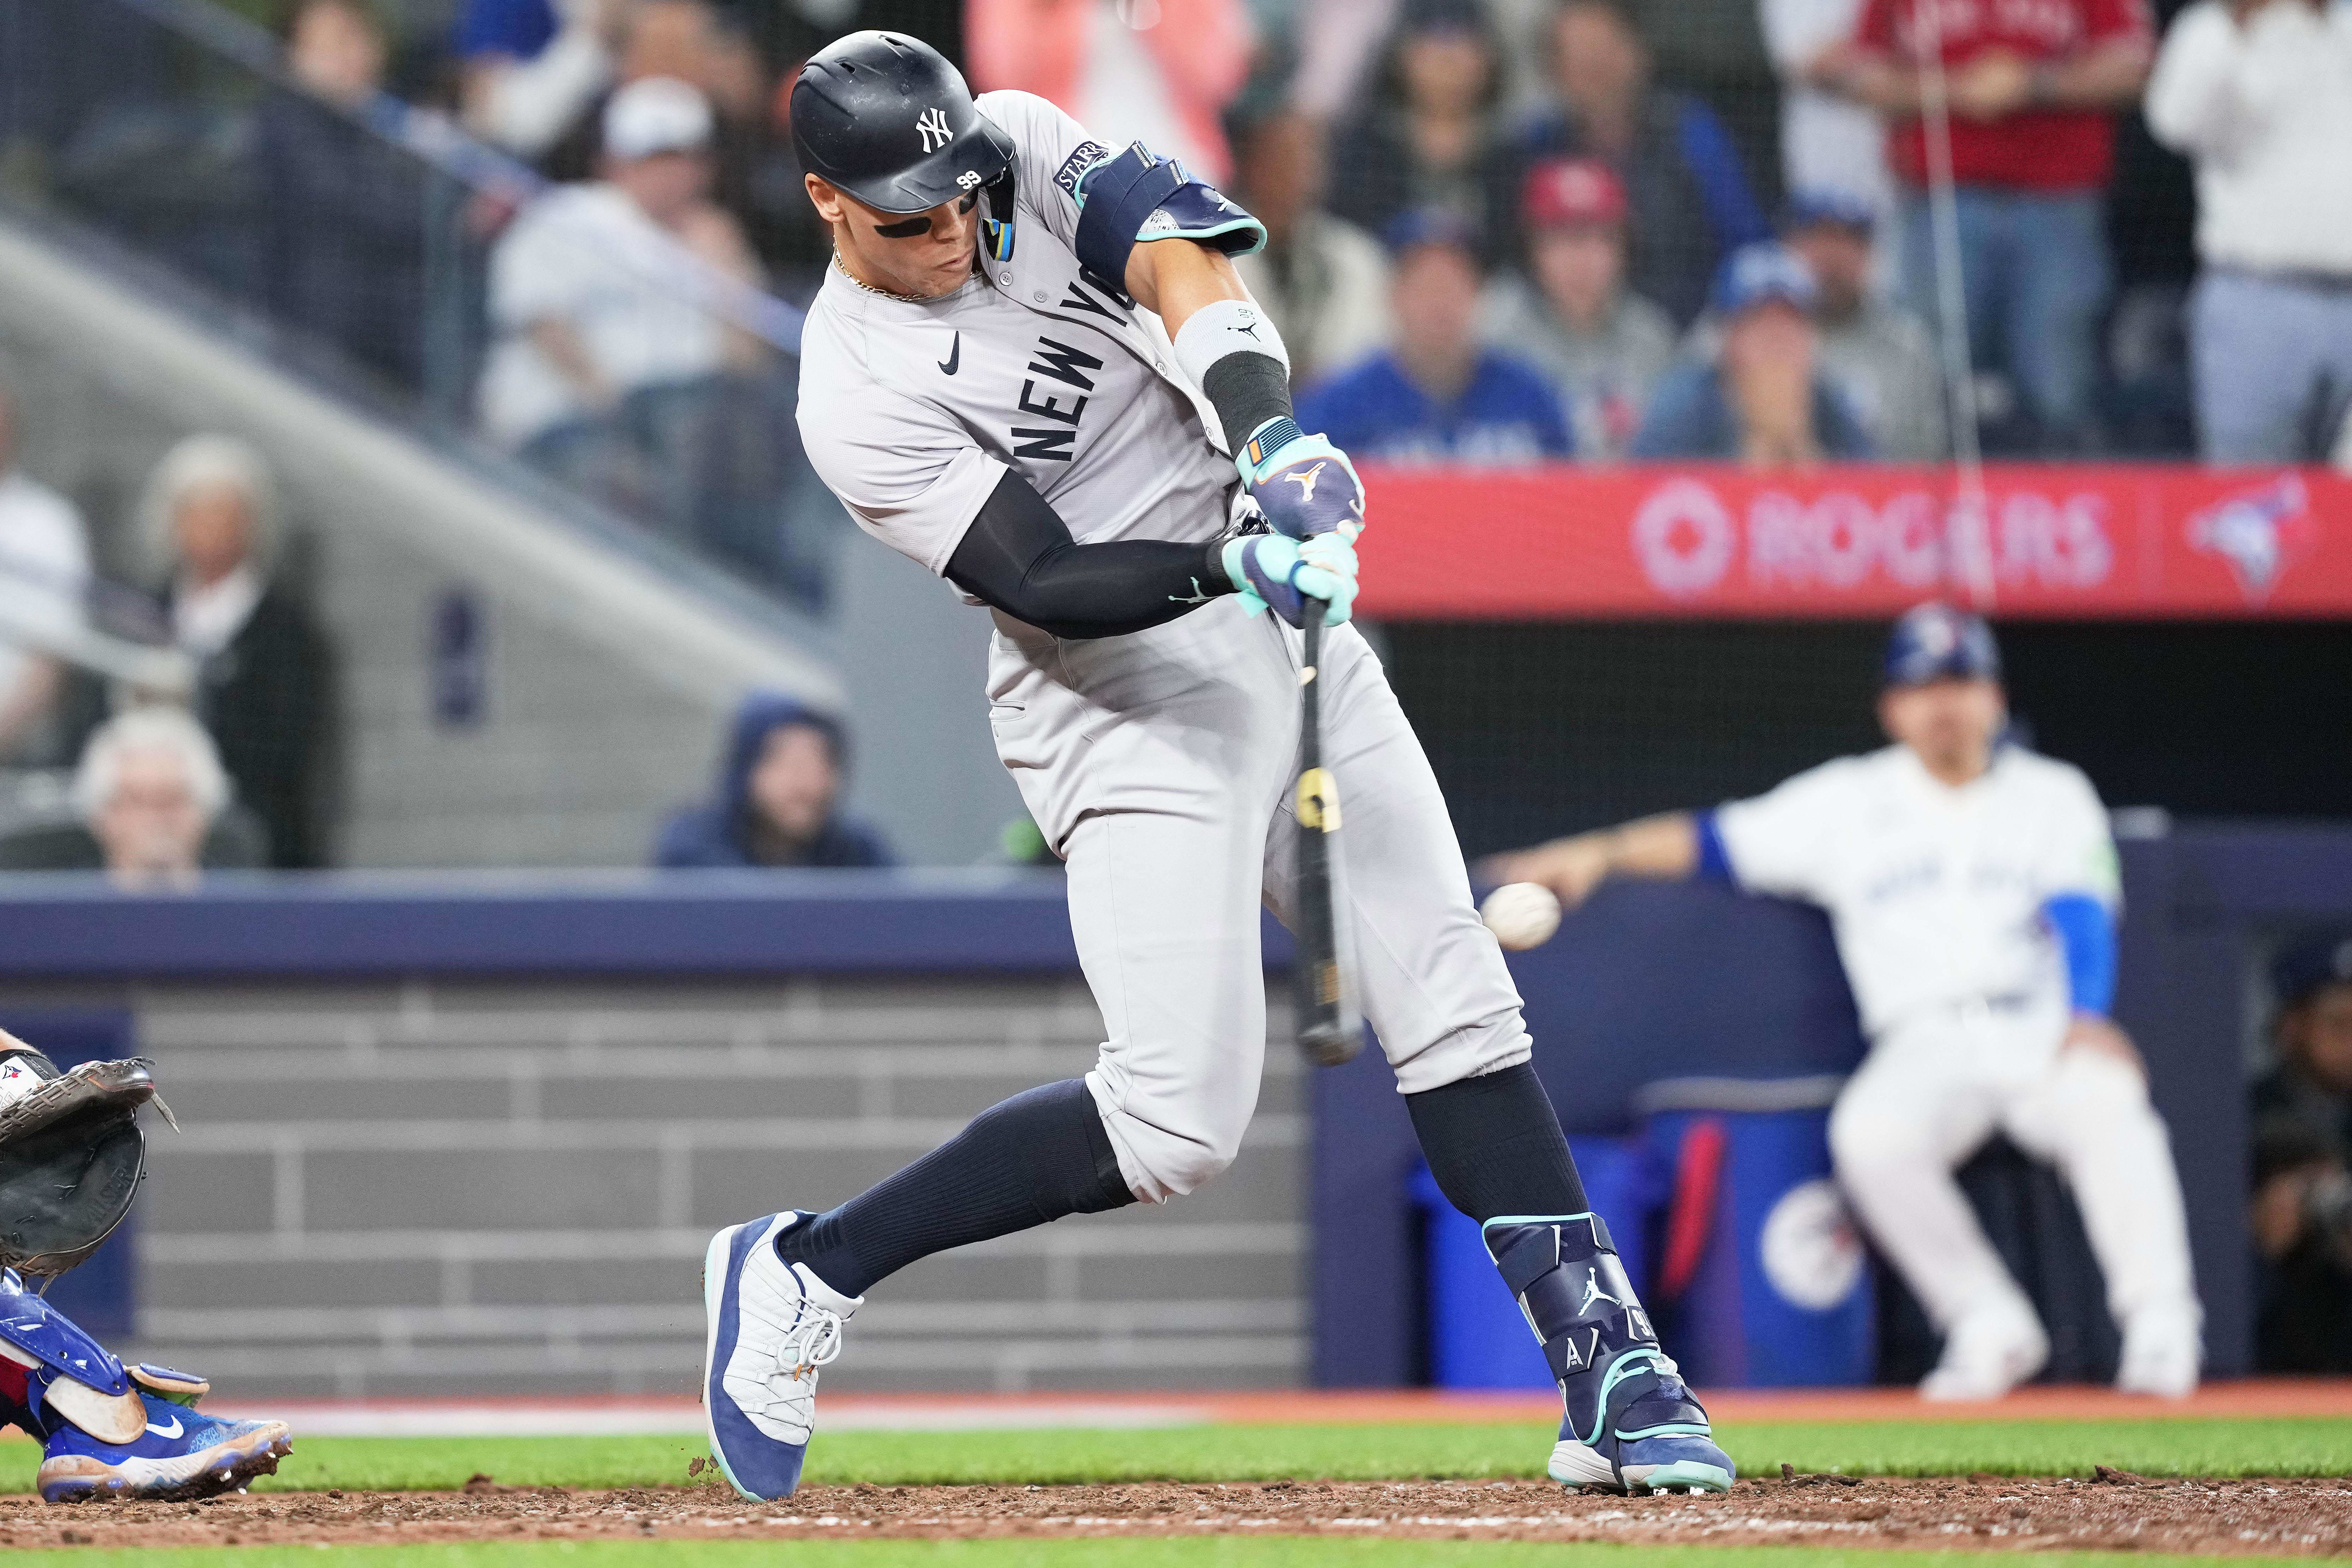 New York Yankees outfielder Aaron Judge hits a home run.